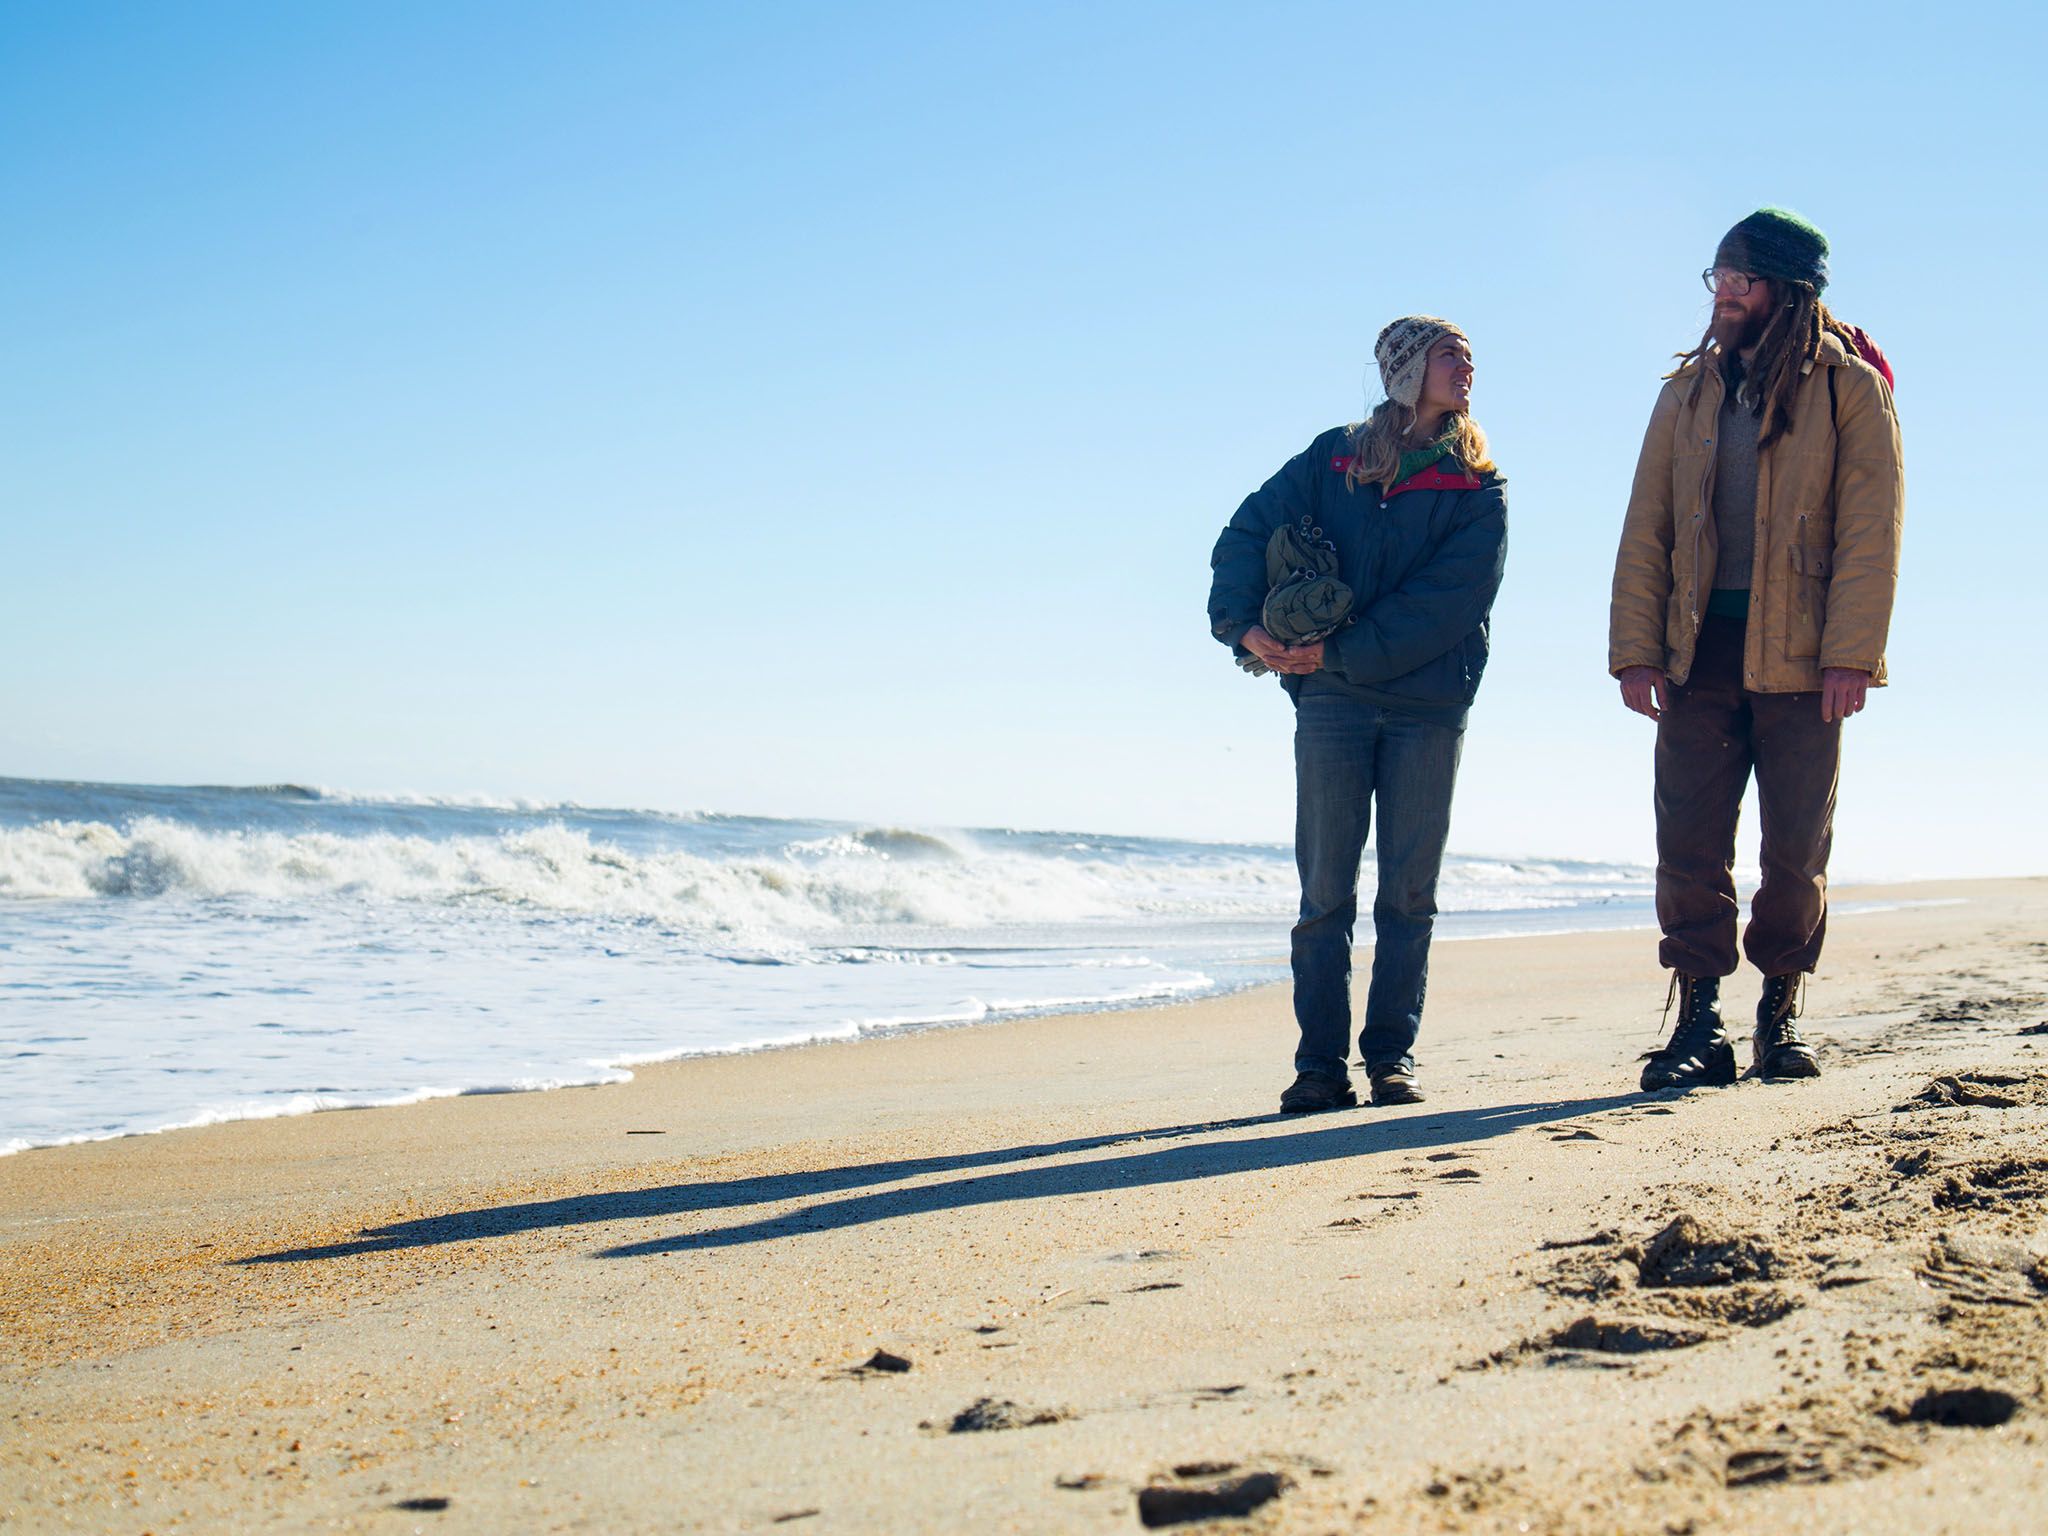 Cape Hatteras, N.C.: Tony and Amelia looking at each other on the beach. This image is from Live... [Photo of the day - October 2016]